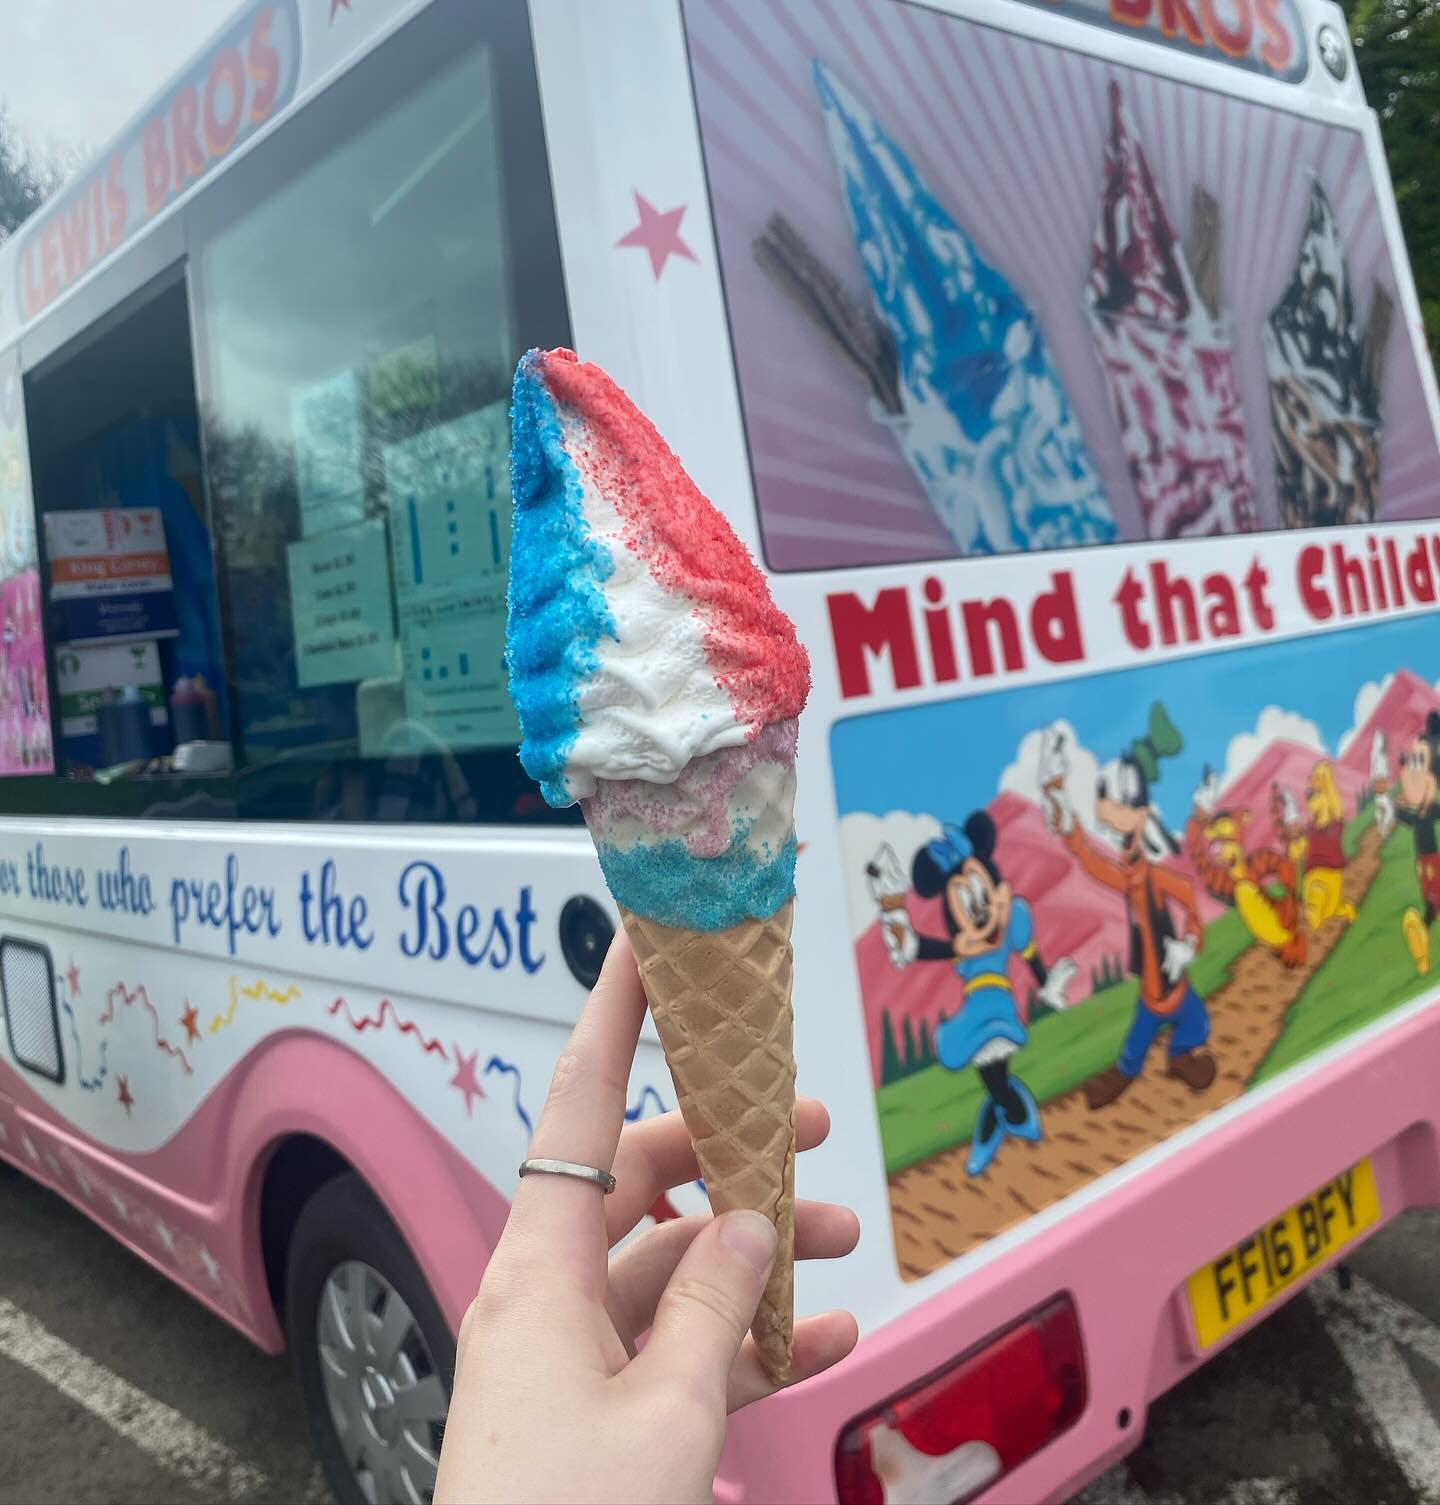 So pretty next to our pink van 😍😍

#lewisbrosicecream #icecream #icecreamlover #flake #icecreamvan #sweet #sweettreats #vanlife #dessert #local #warrington #manchester #manchesterfood #cheshire #warringtonbusiness #desserts #sunny